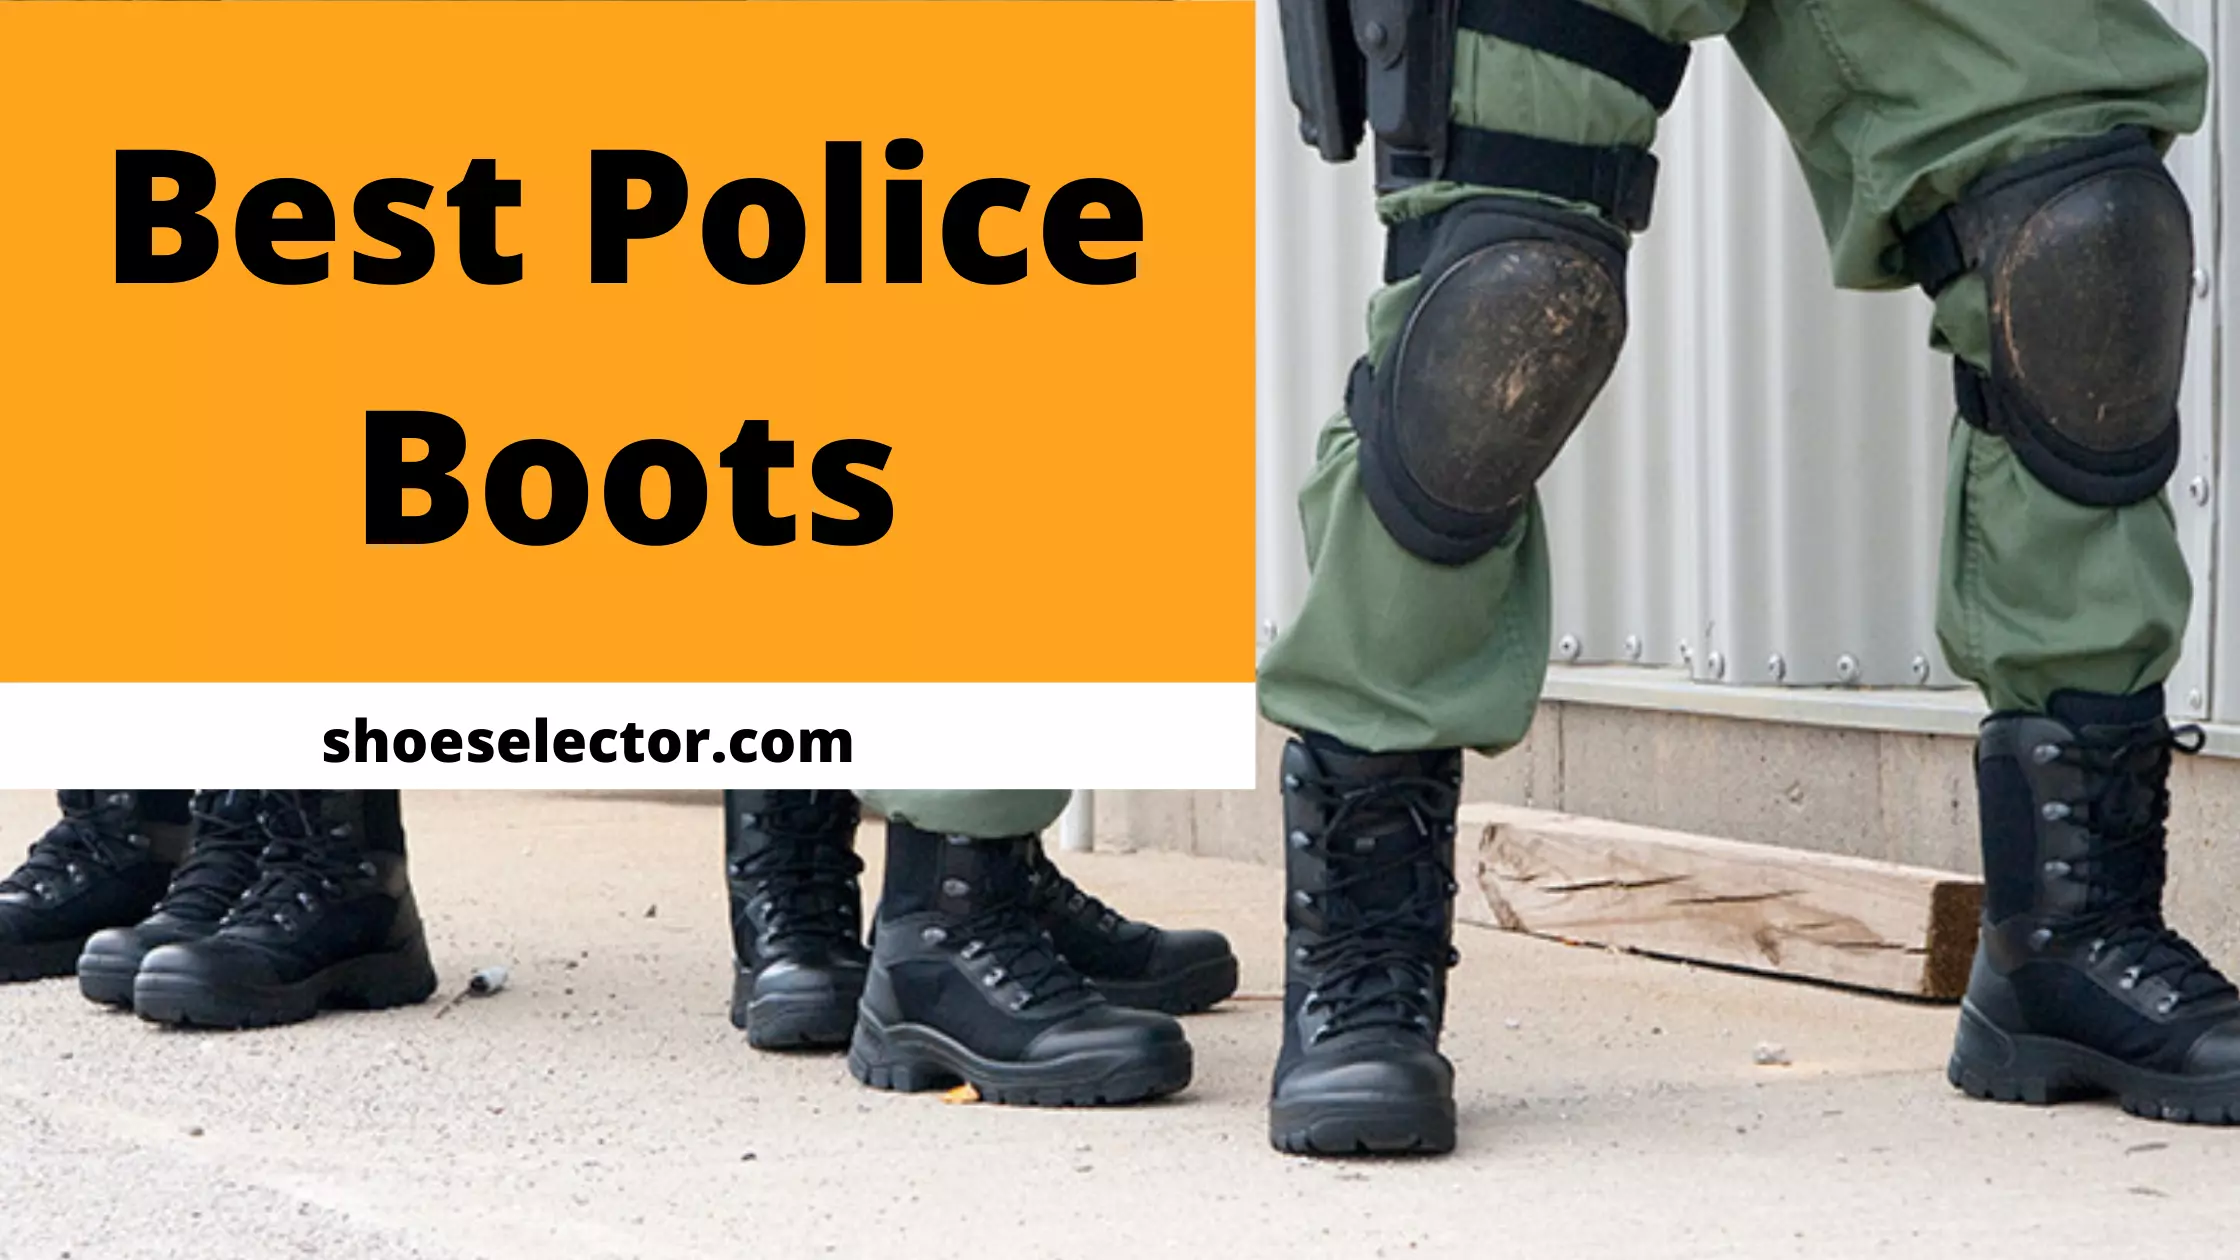 Best Police Boots - Recommended Guide